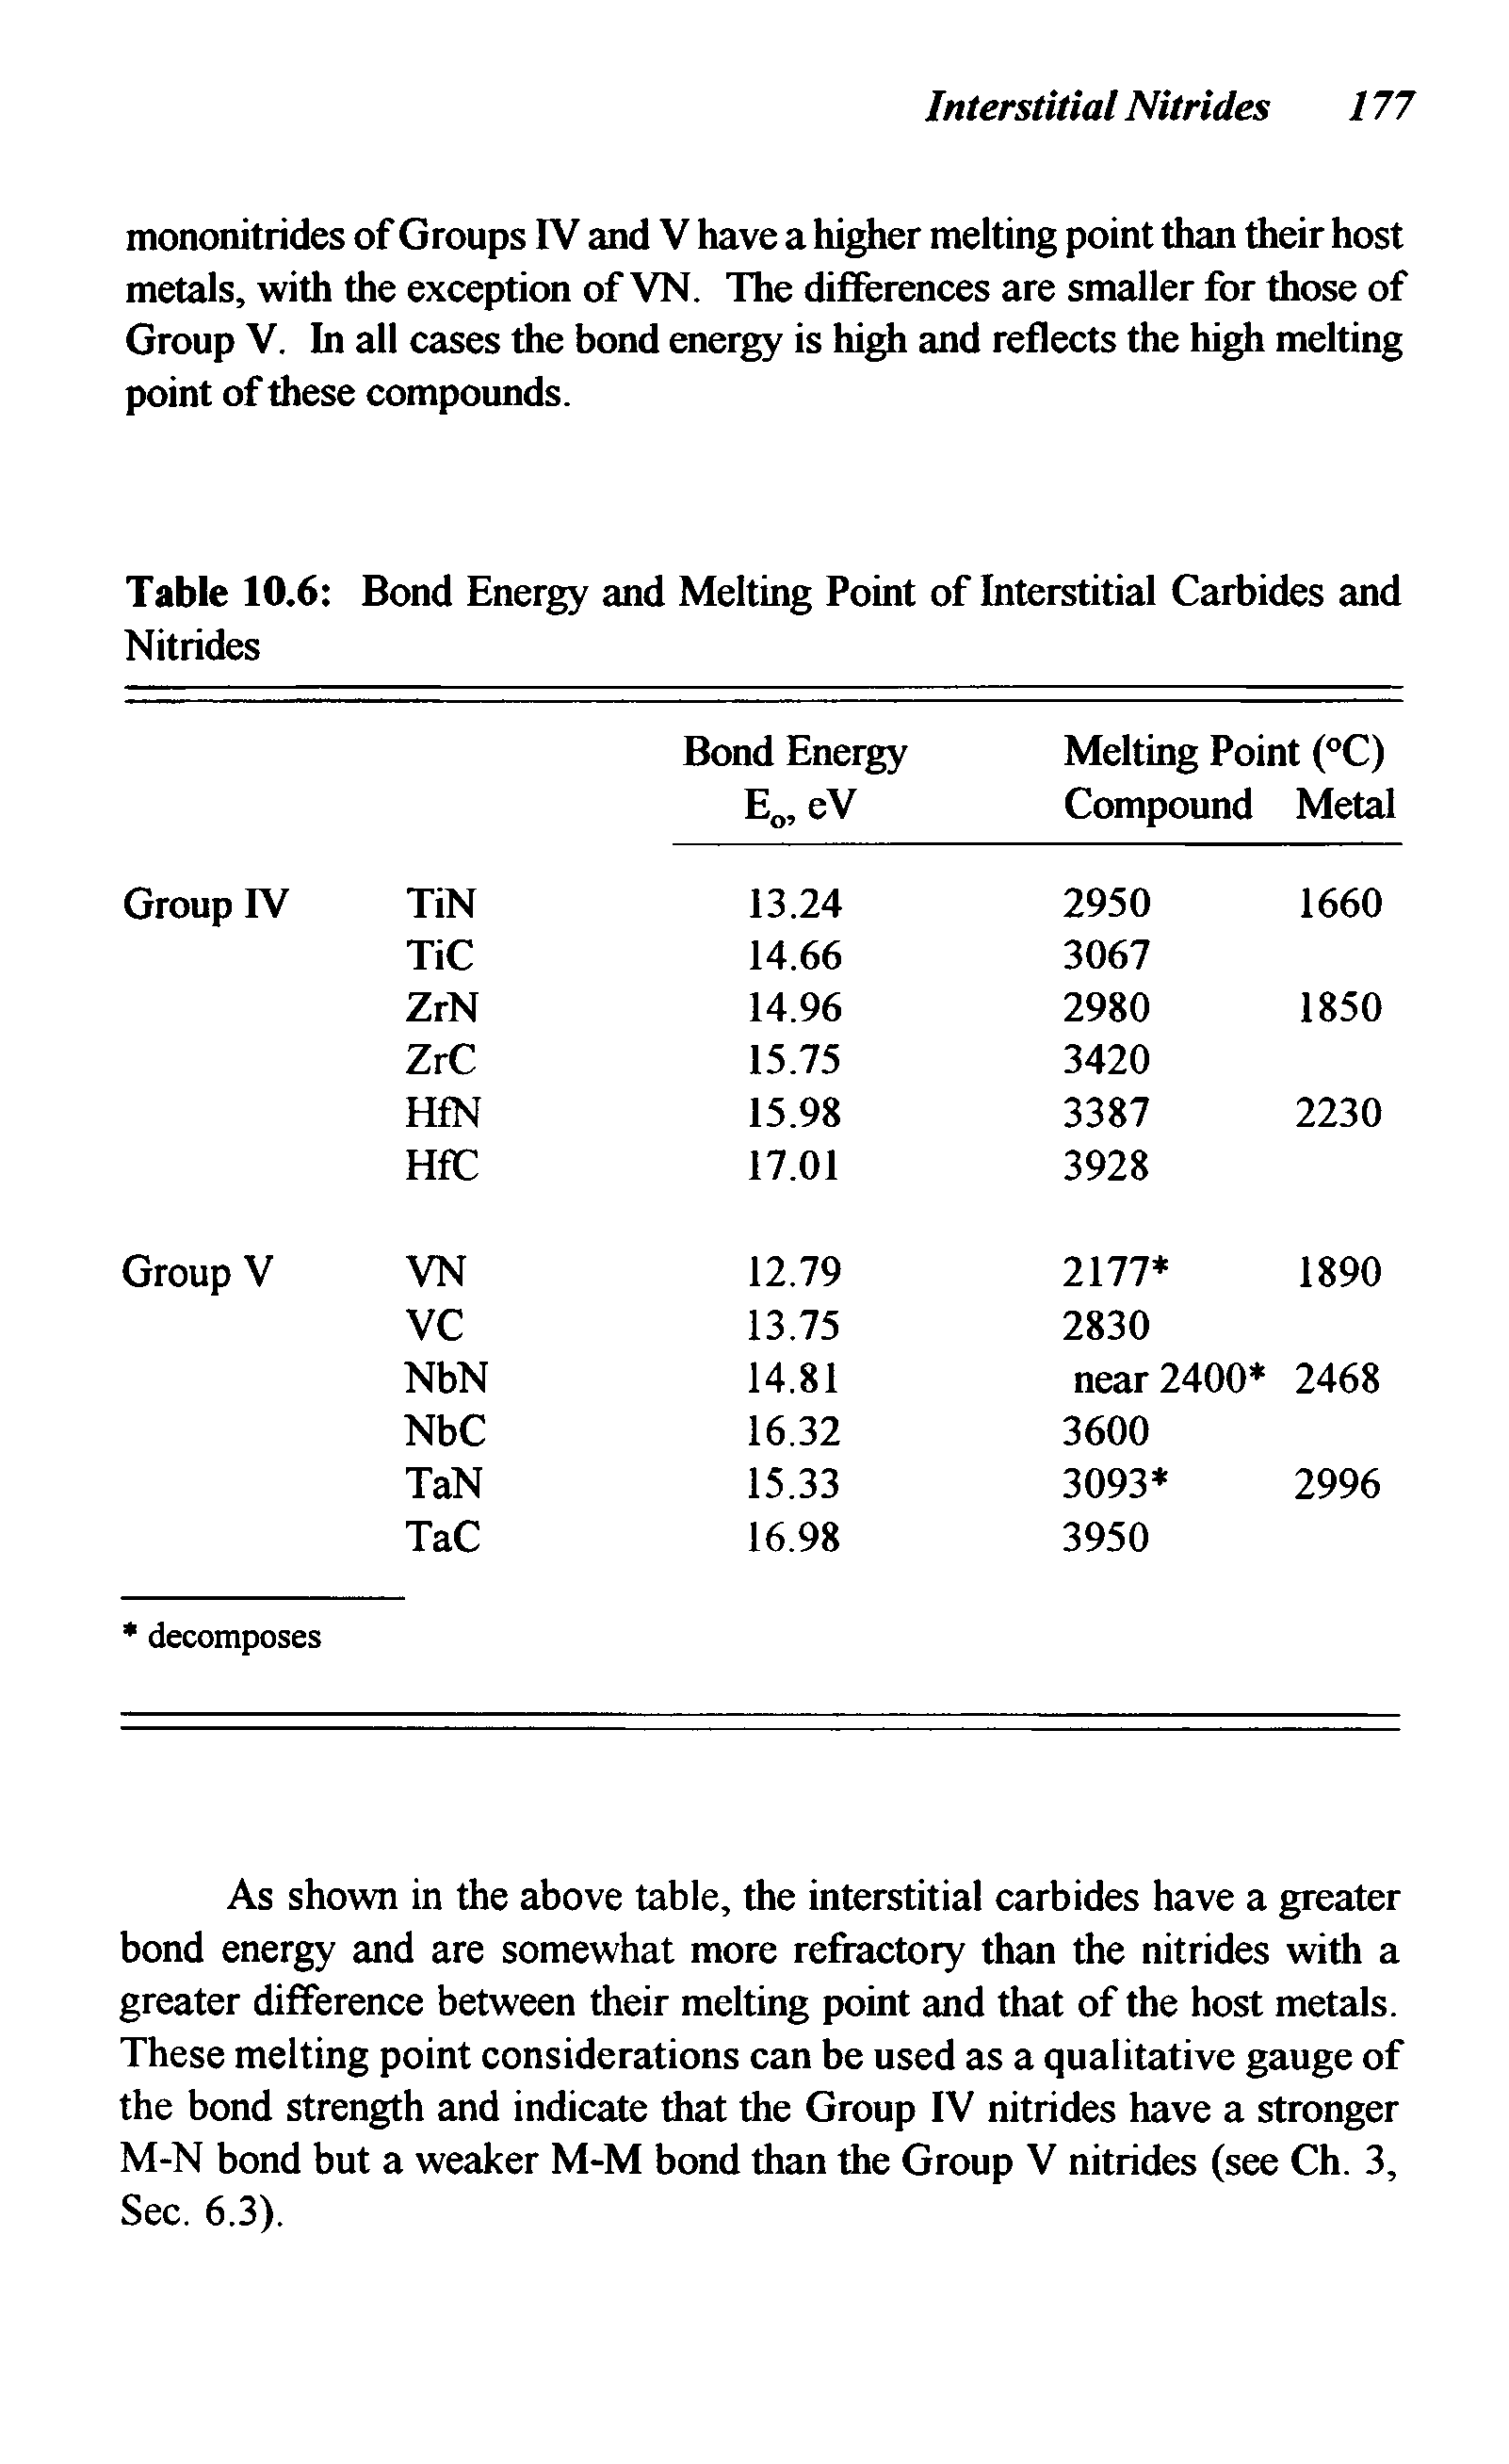 Table 10.6 Bond Energy and Melting Point of Interstitial Carbides and Nitrides...